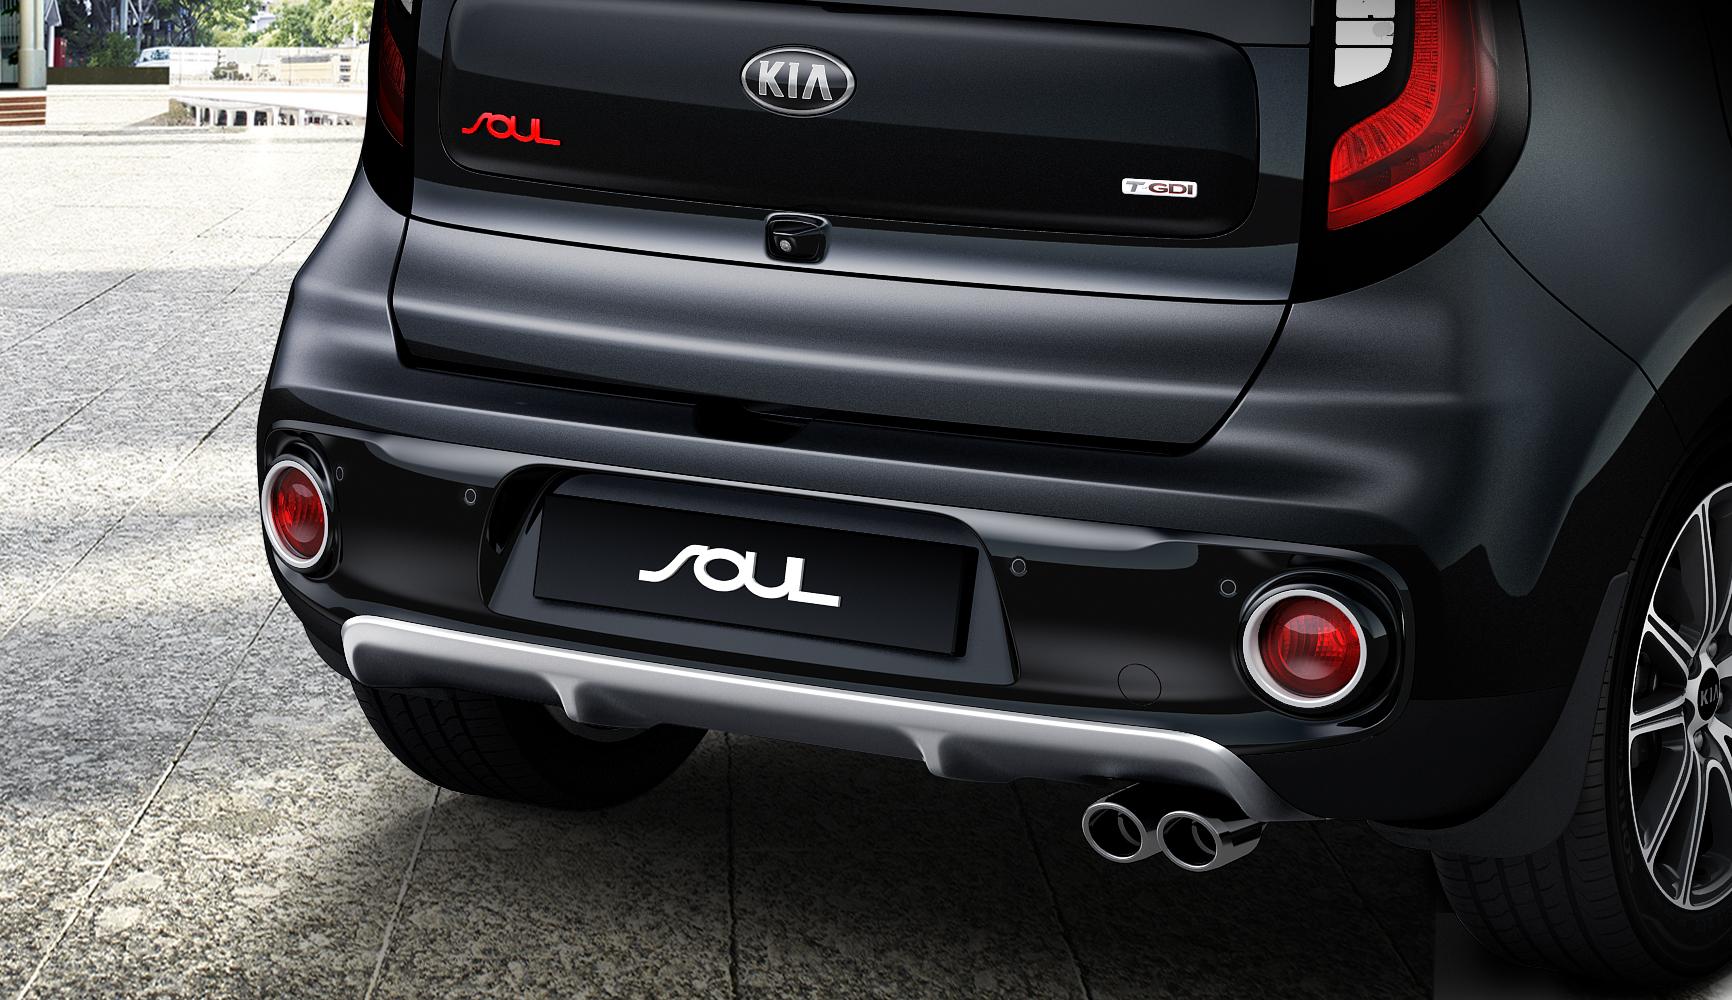 The Kia Soul has been delighting customers for over a decade.